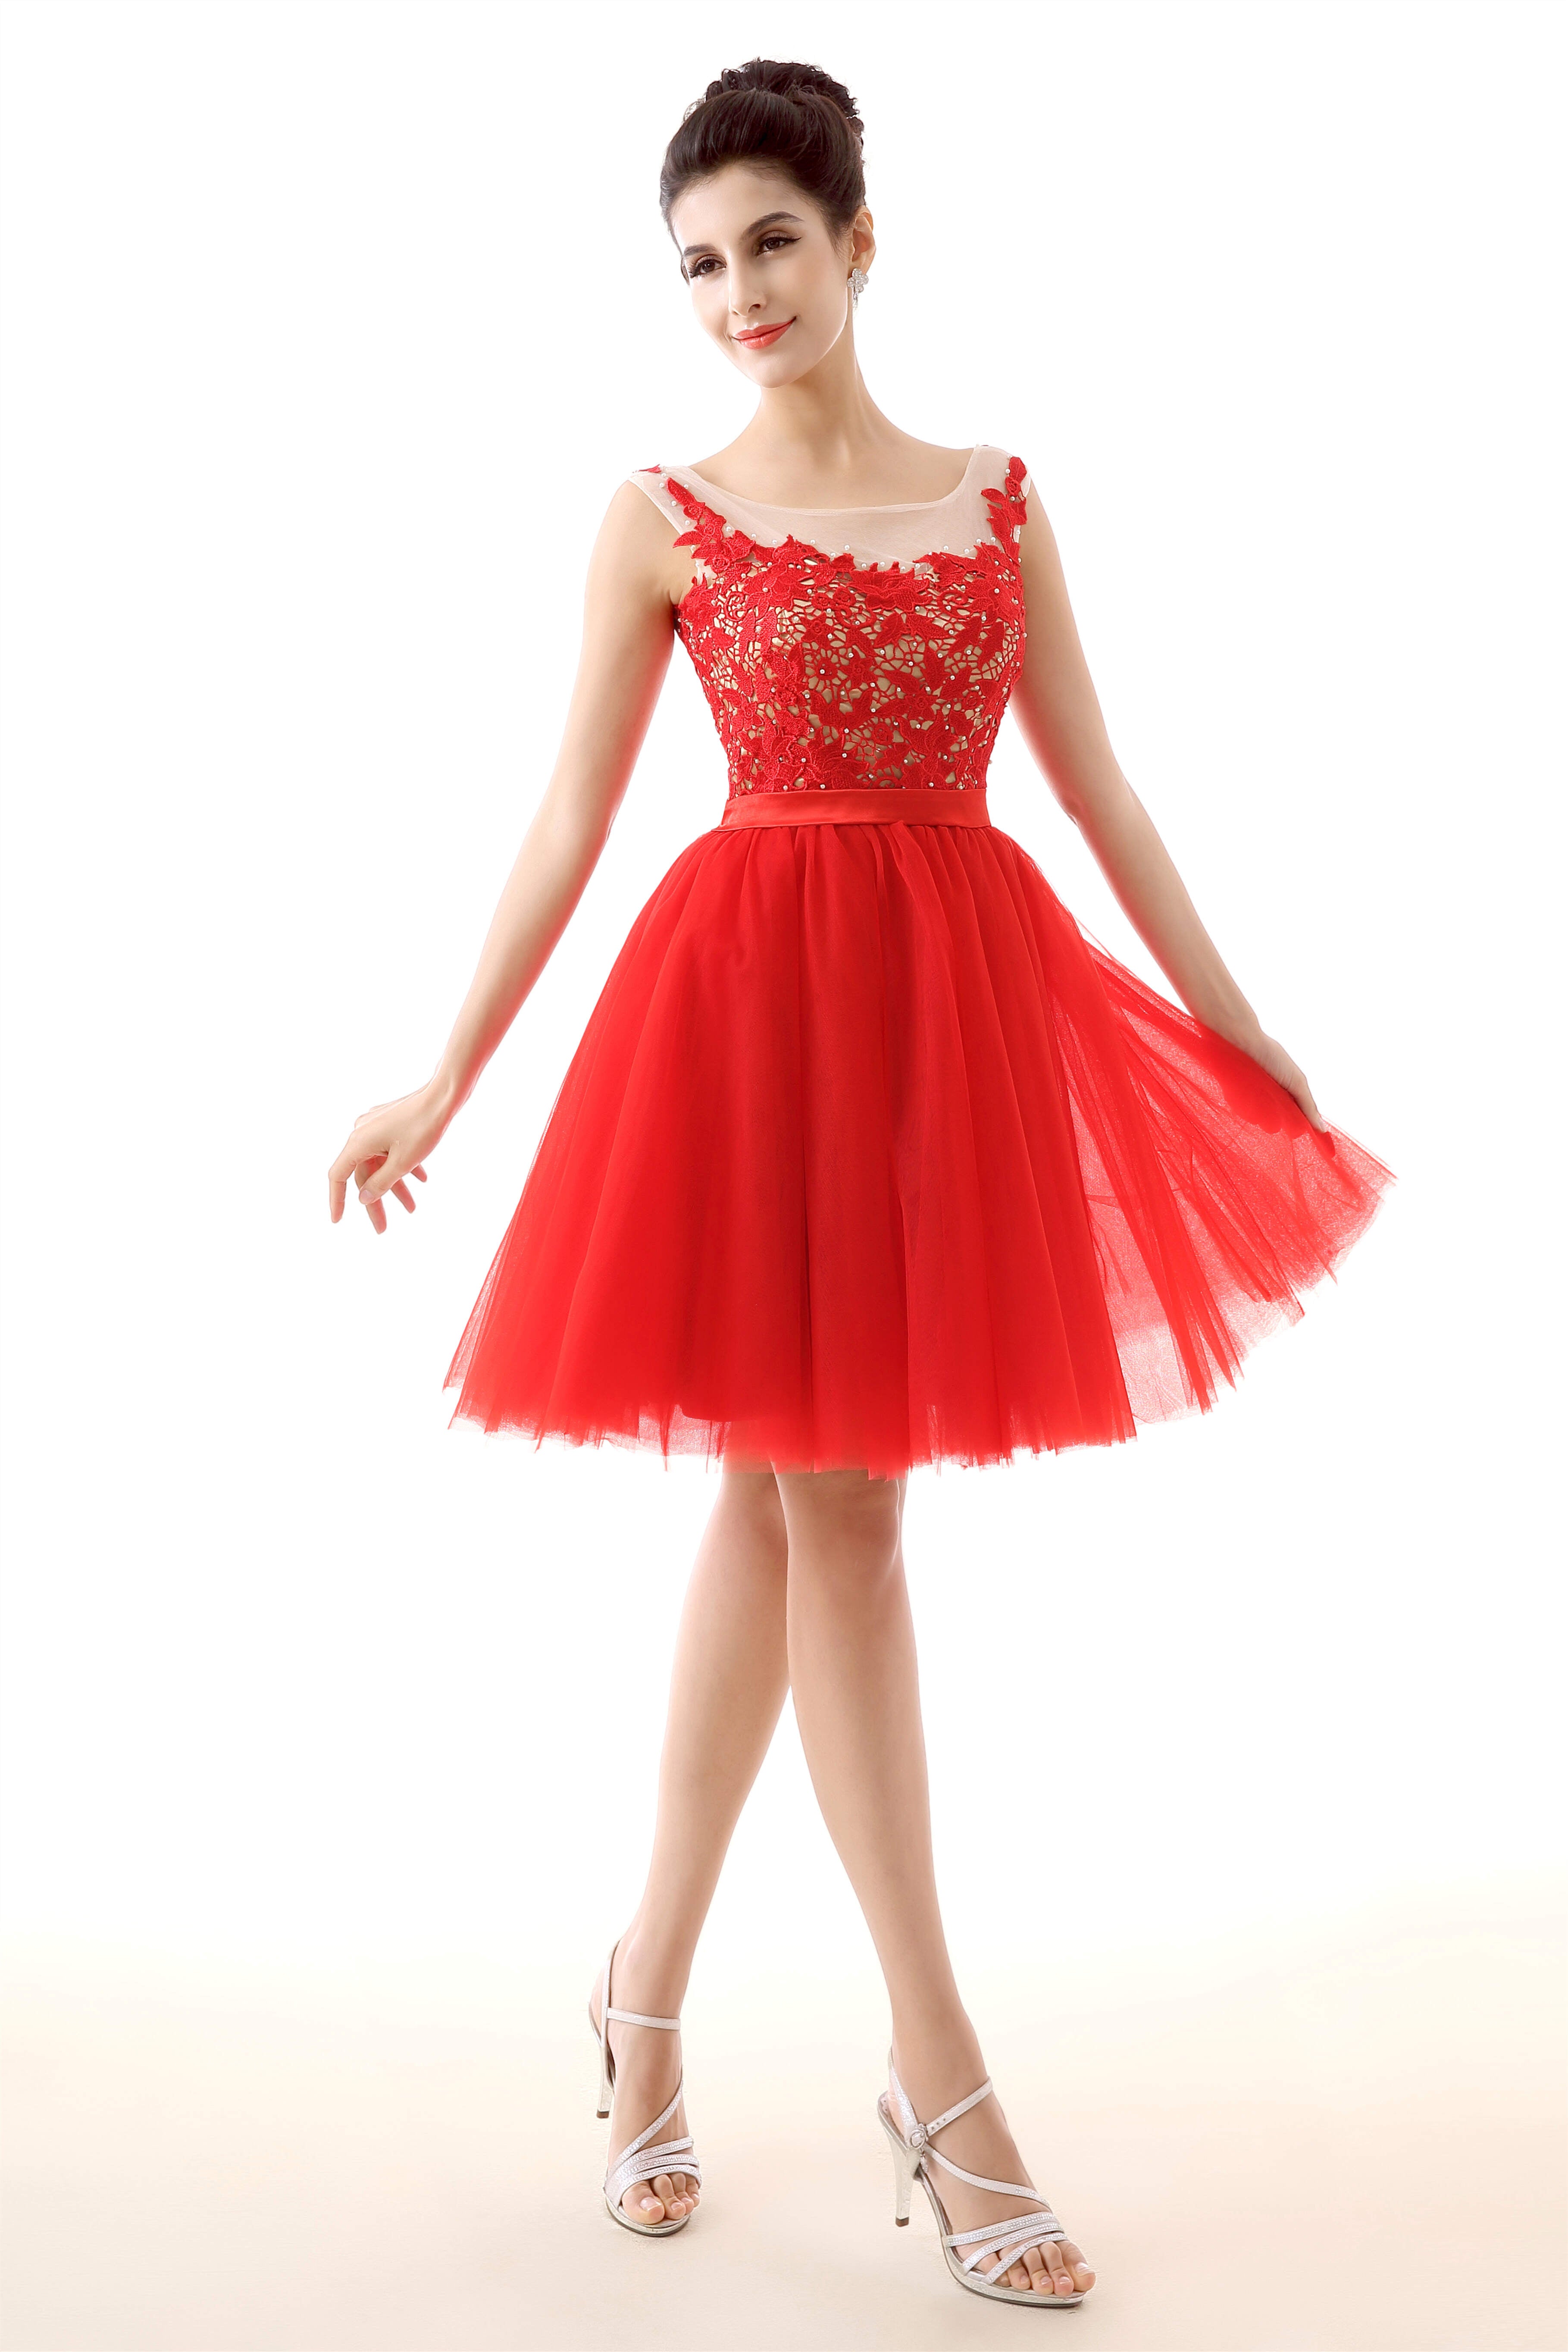 Prom Dresses Brand, Lace Cute Red Short Homecoming Dresses